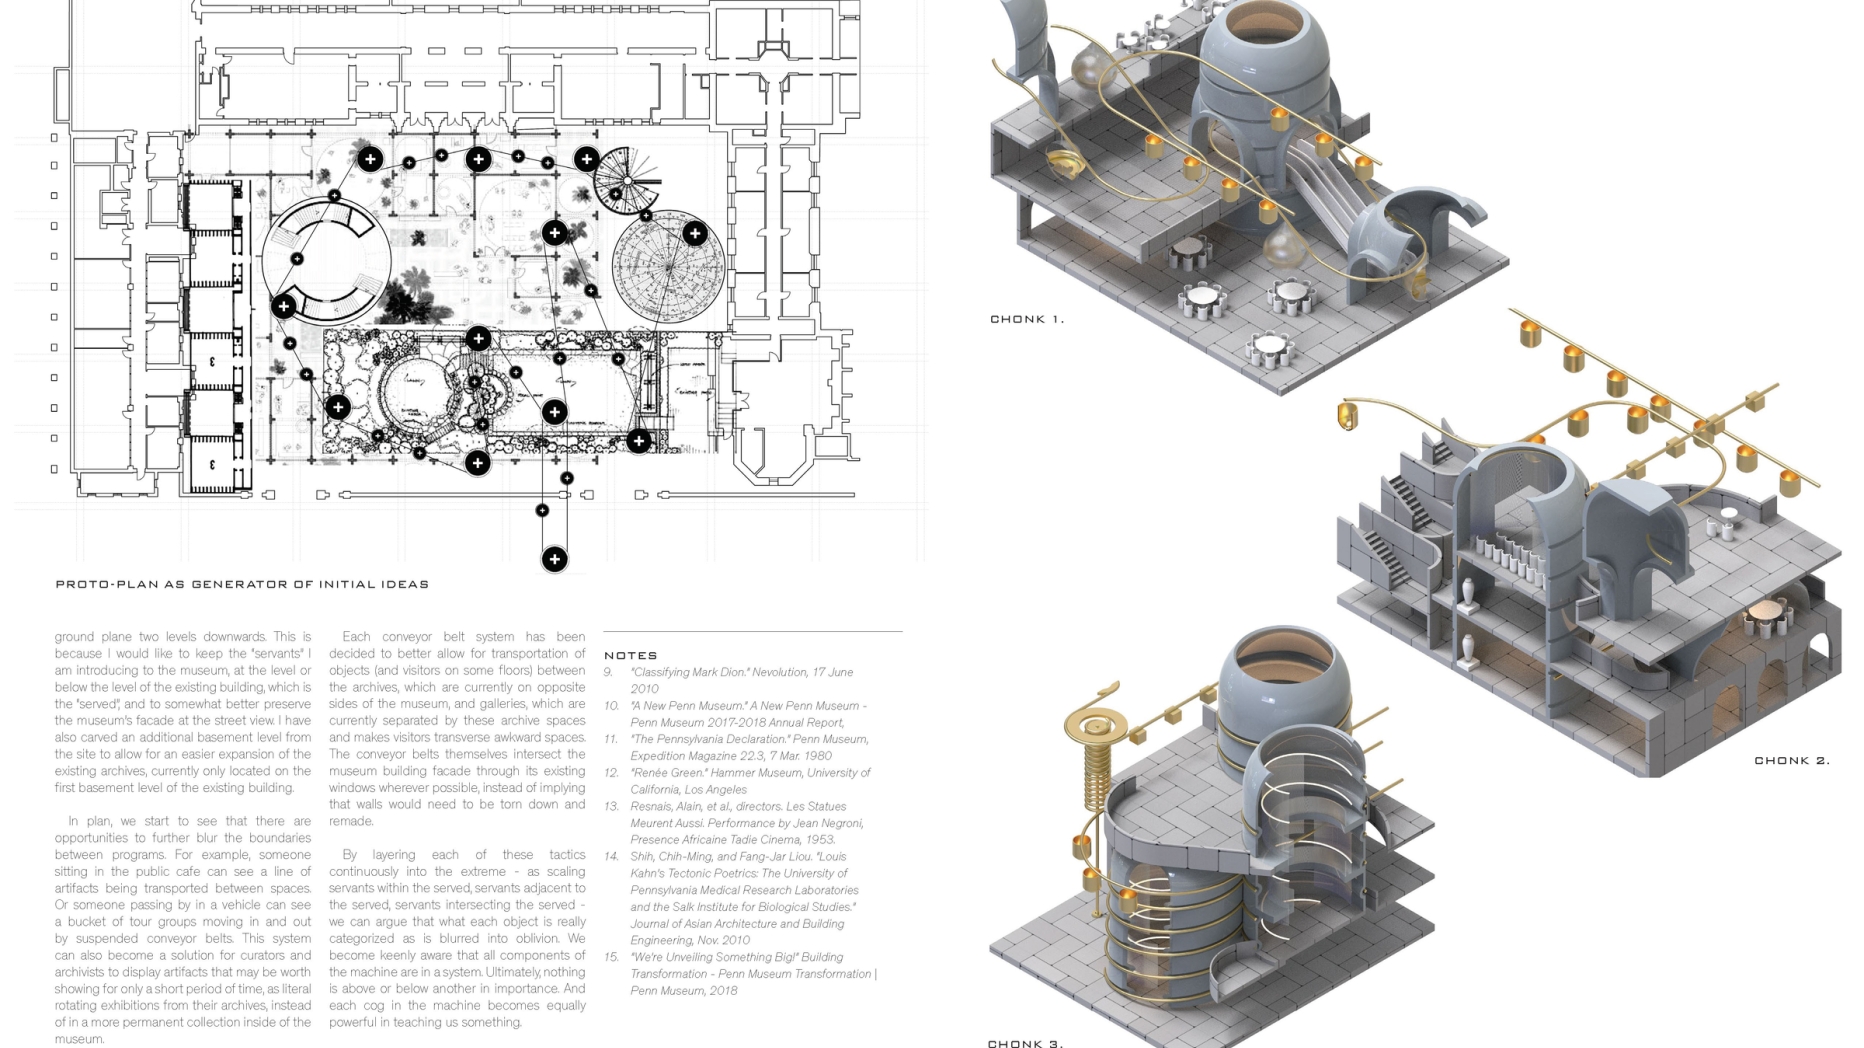 floorplan and cutaways of sections of the space